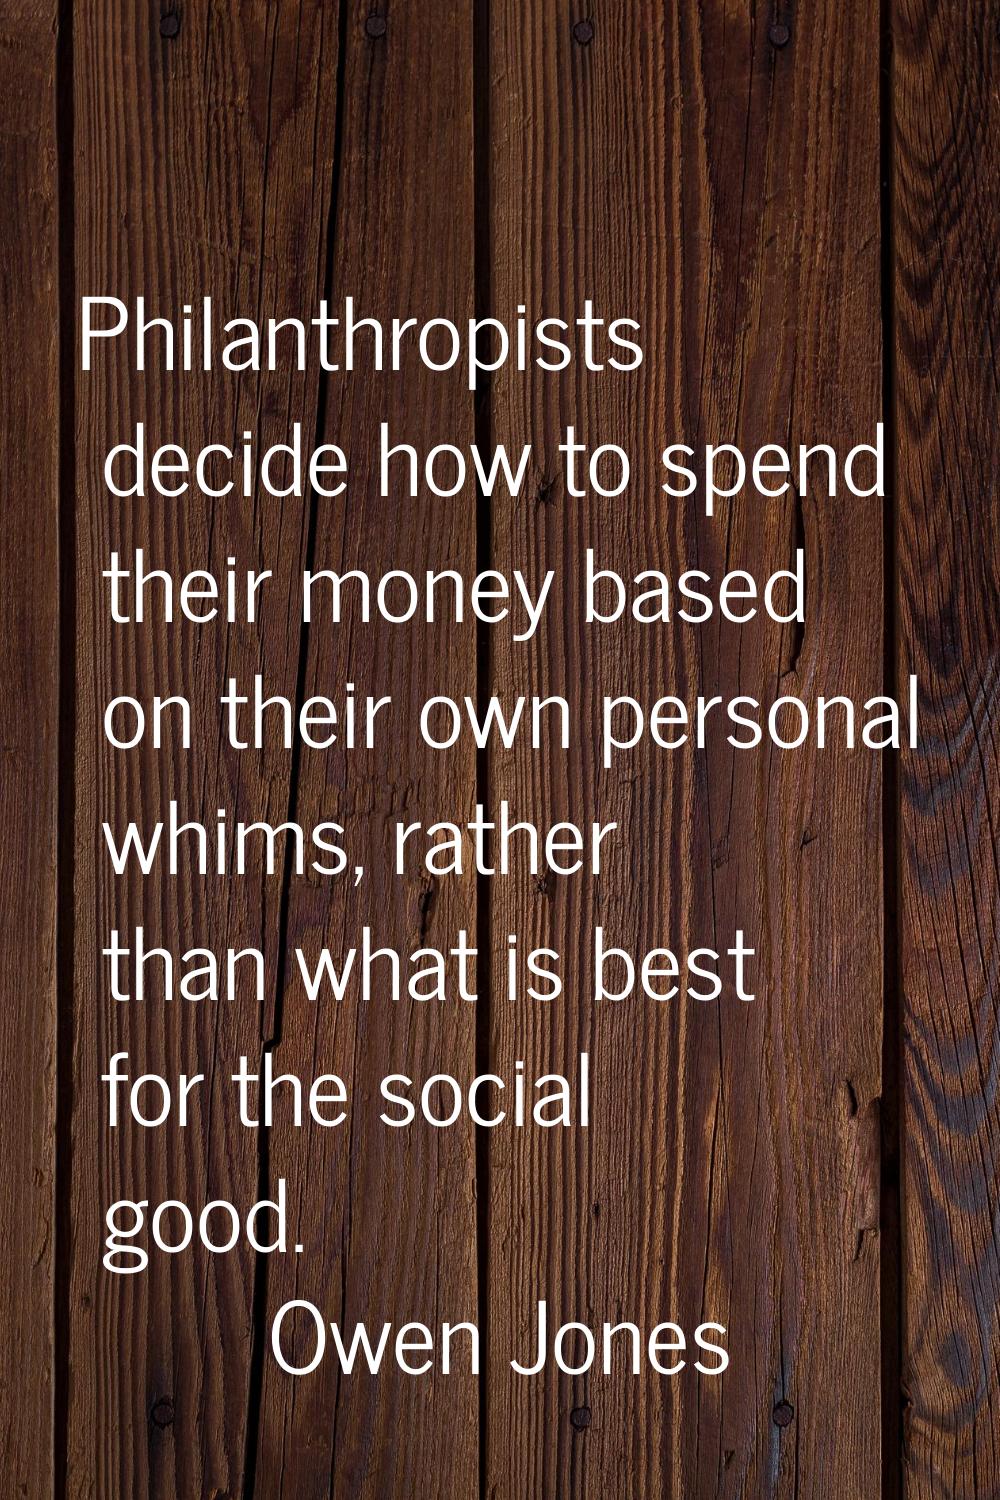 Philanthropists decide how to spend their money based on their own personal whims, rather than what